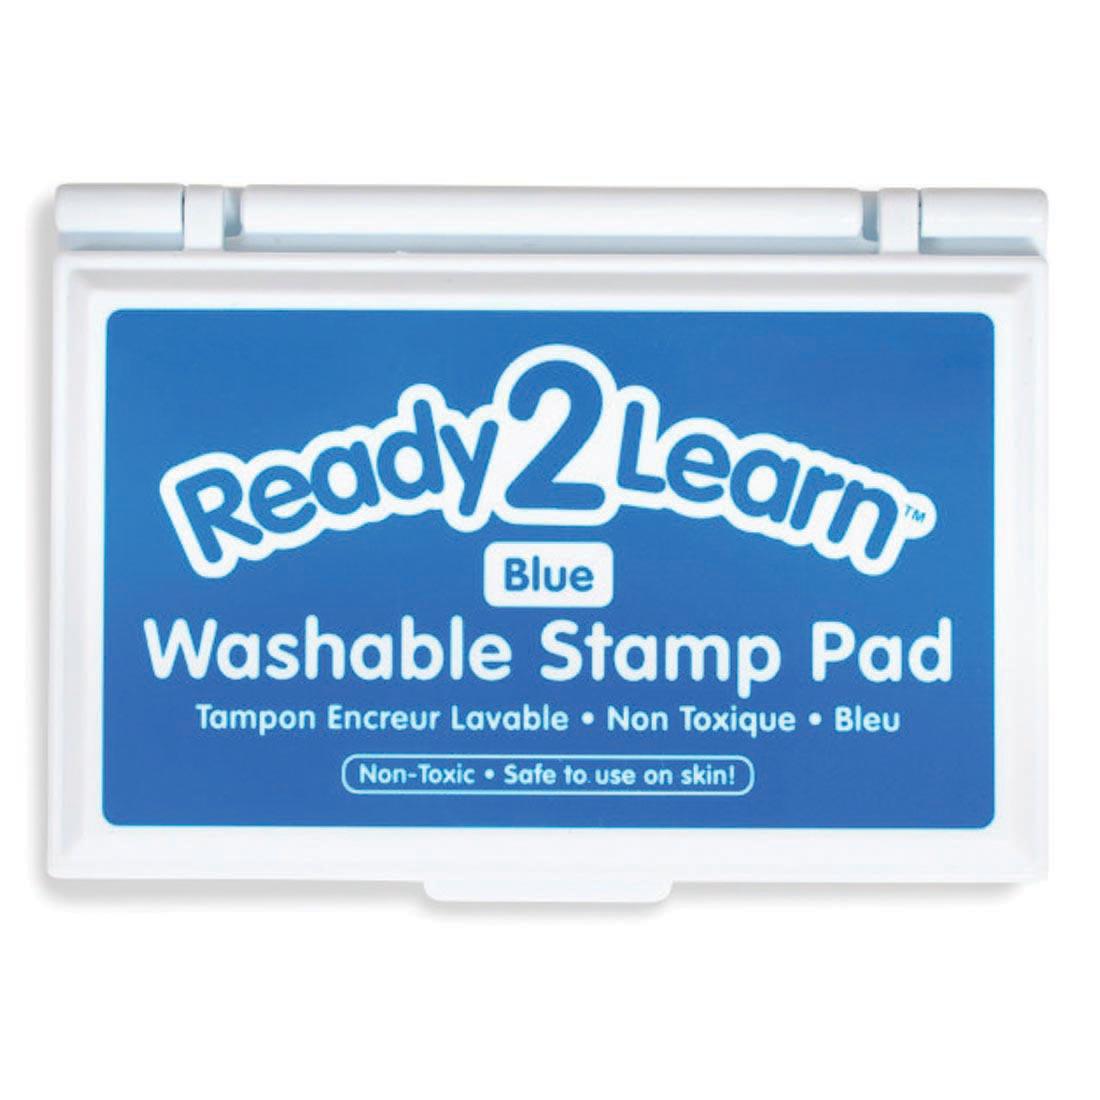 Ready 2 Learn Blue Washable Stamp Pad